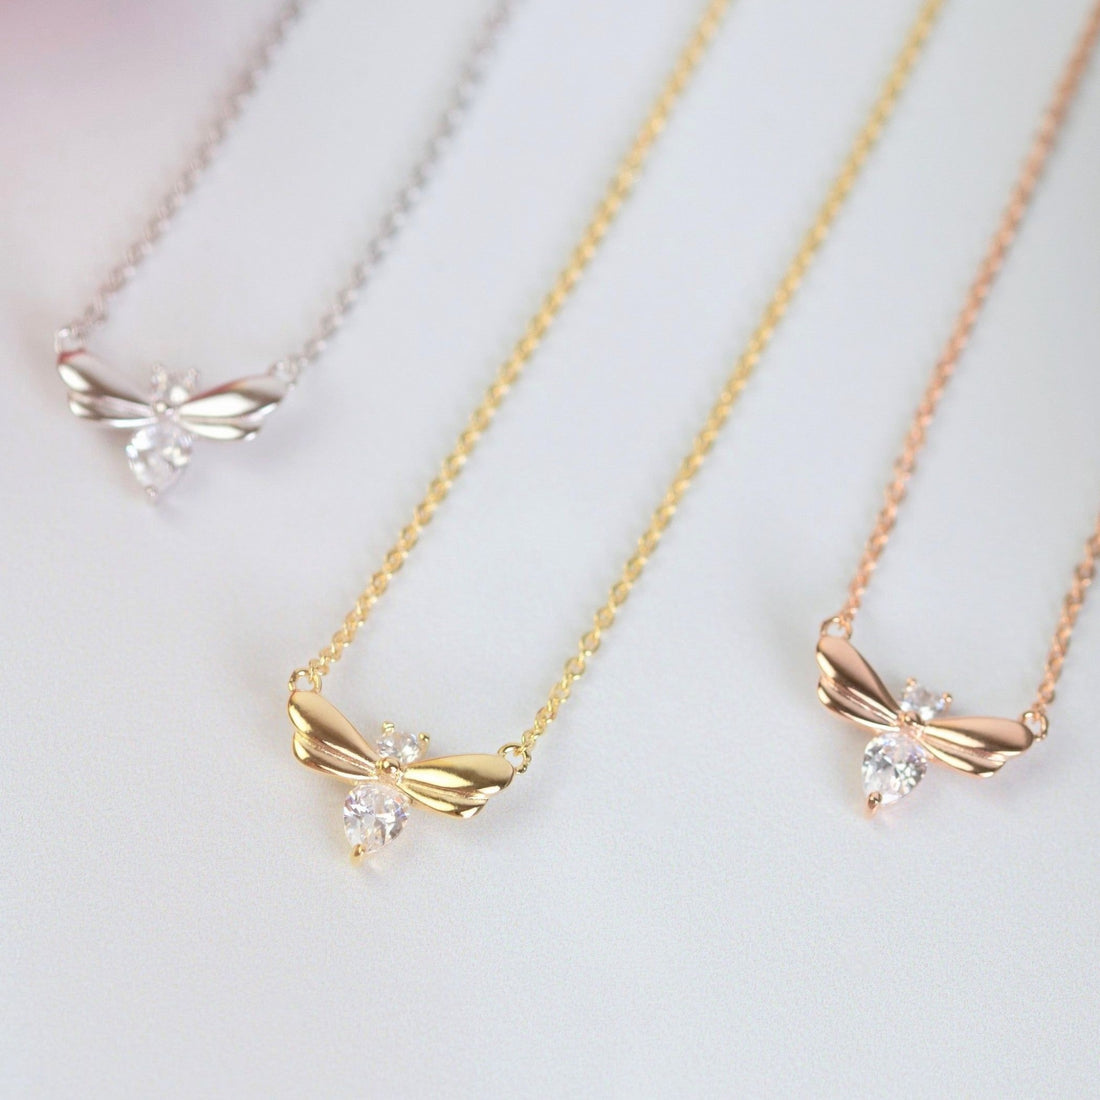 Firefly Necklace Gift